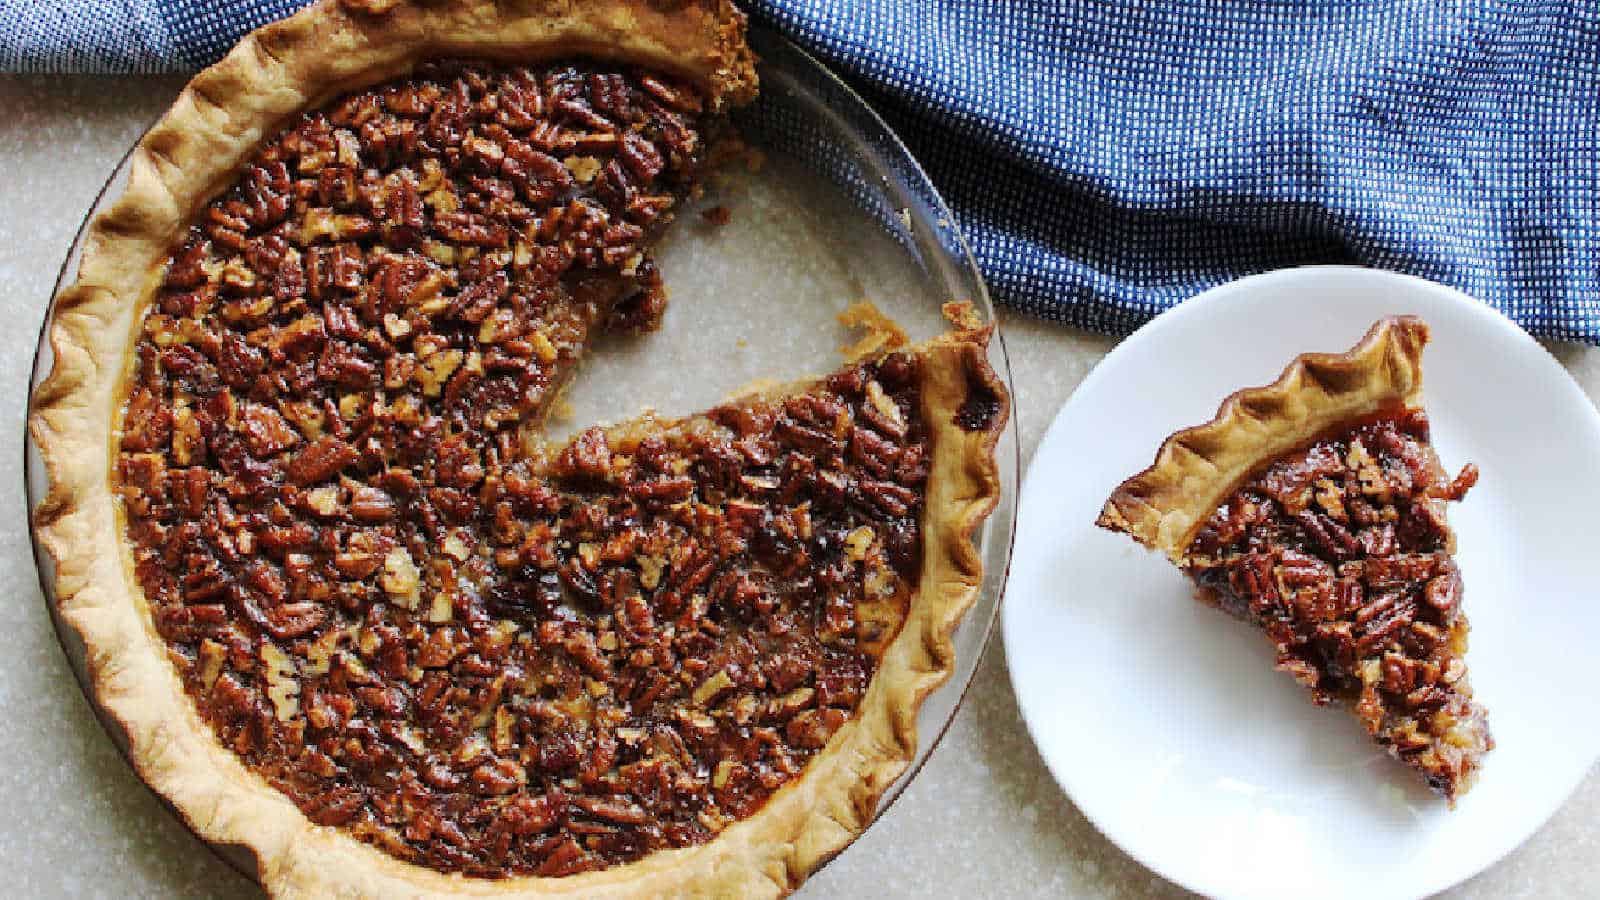 Pecan pie on a plate with a slice taken out.